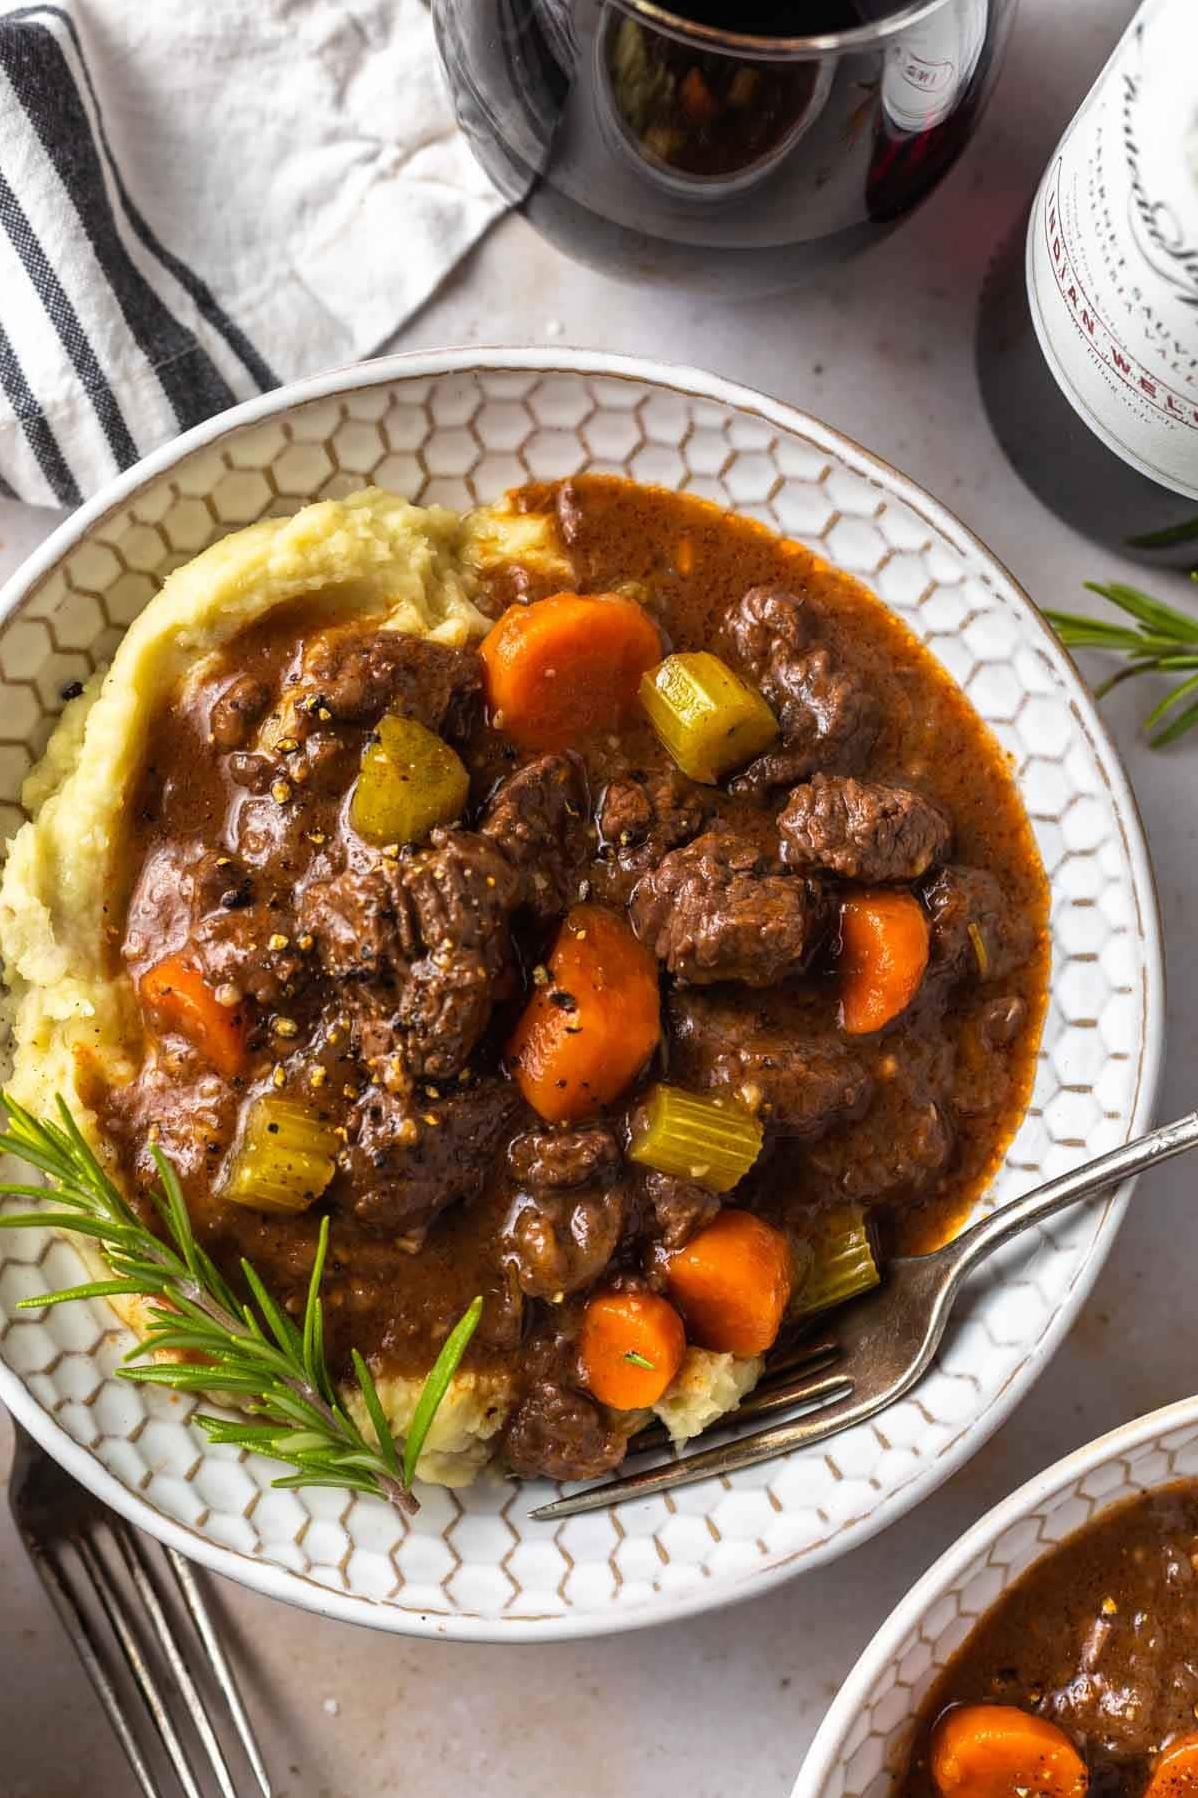  Rich, hearty and full of flavor - this beef stew recipe is a true comfort food classic!